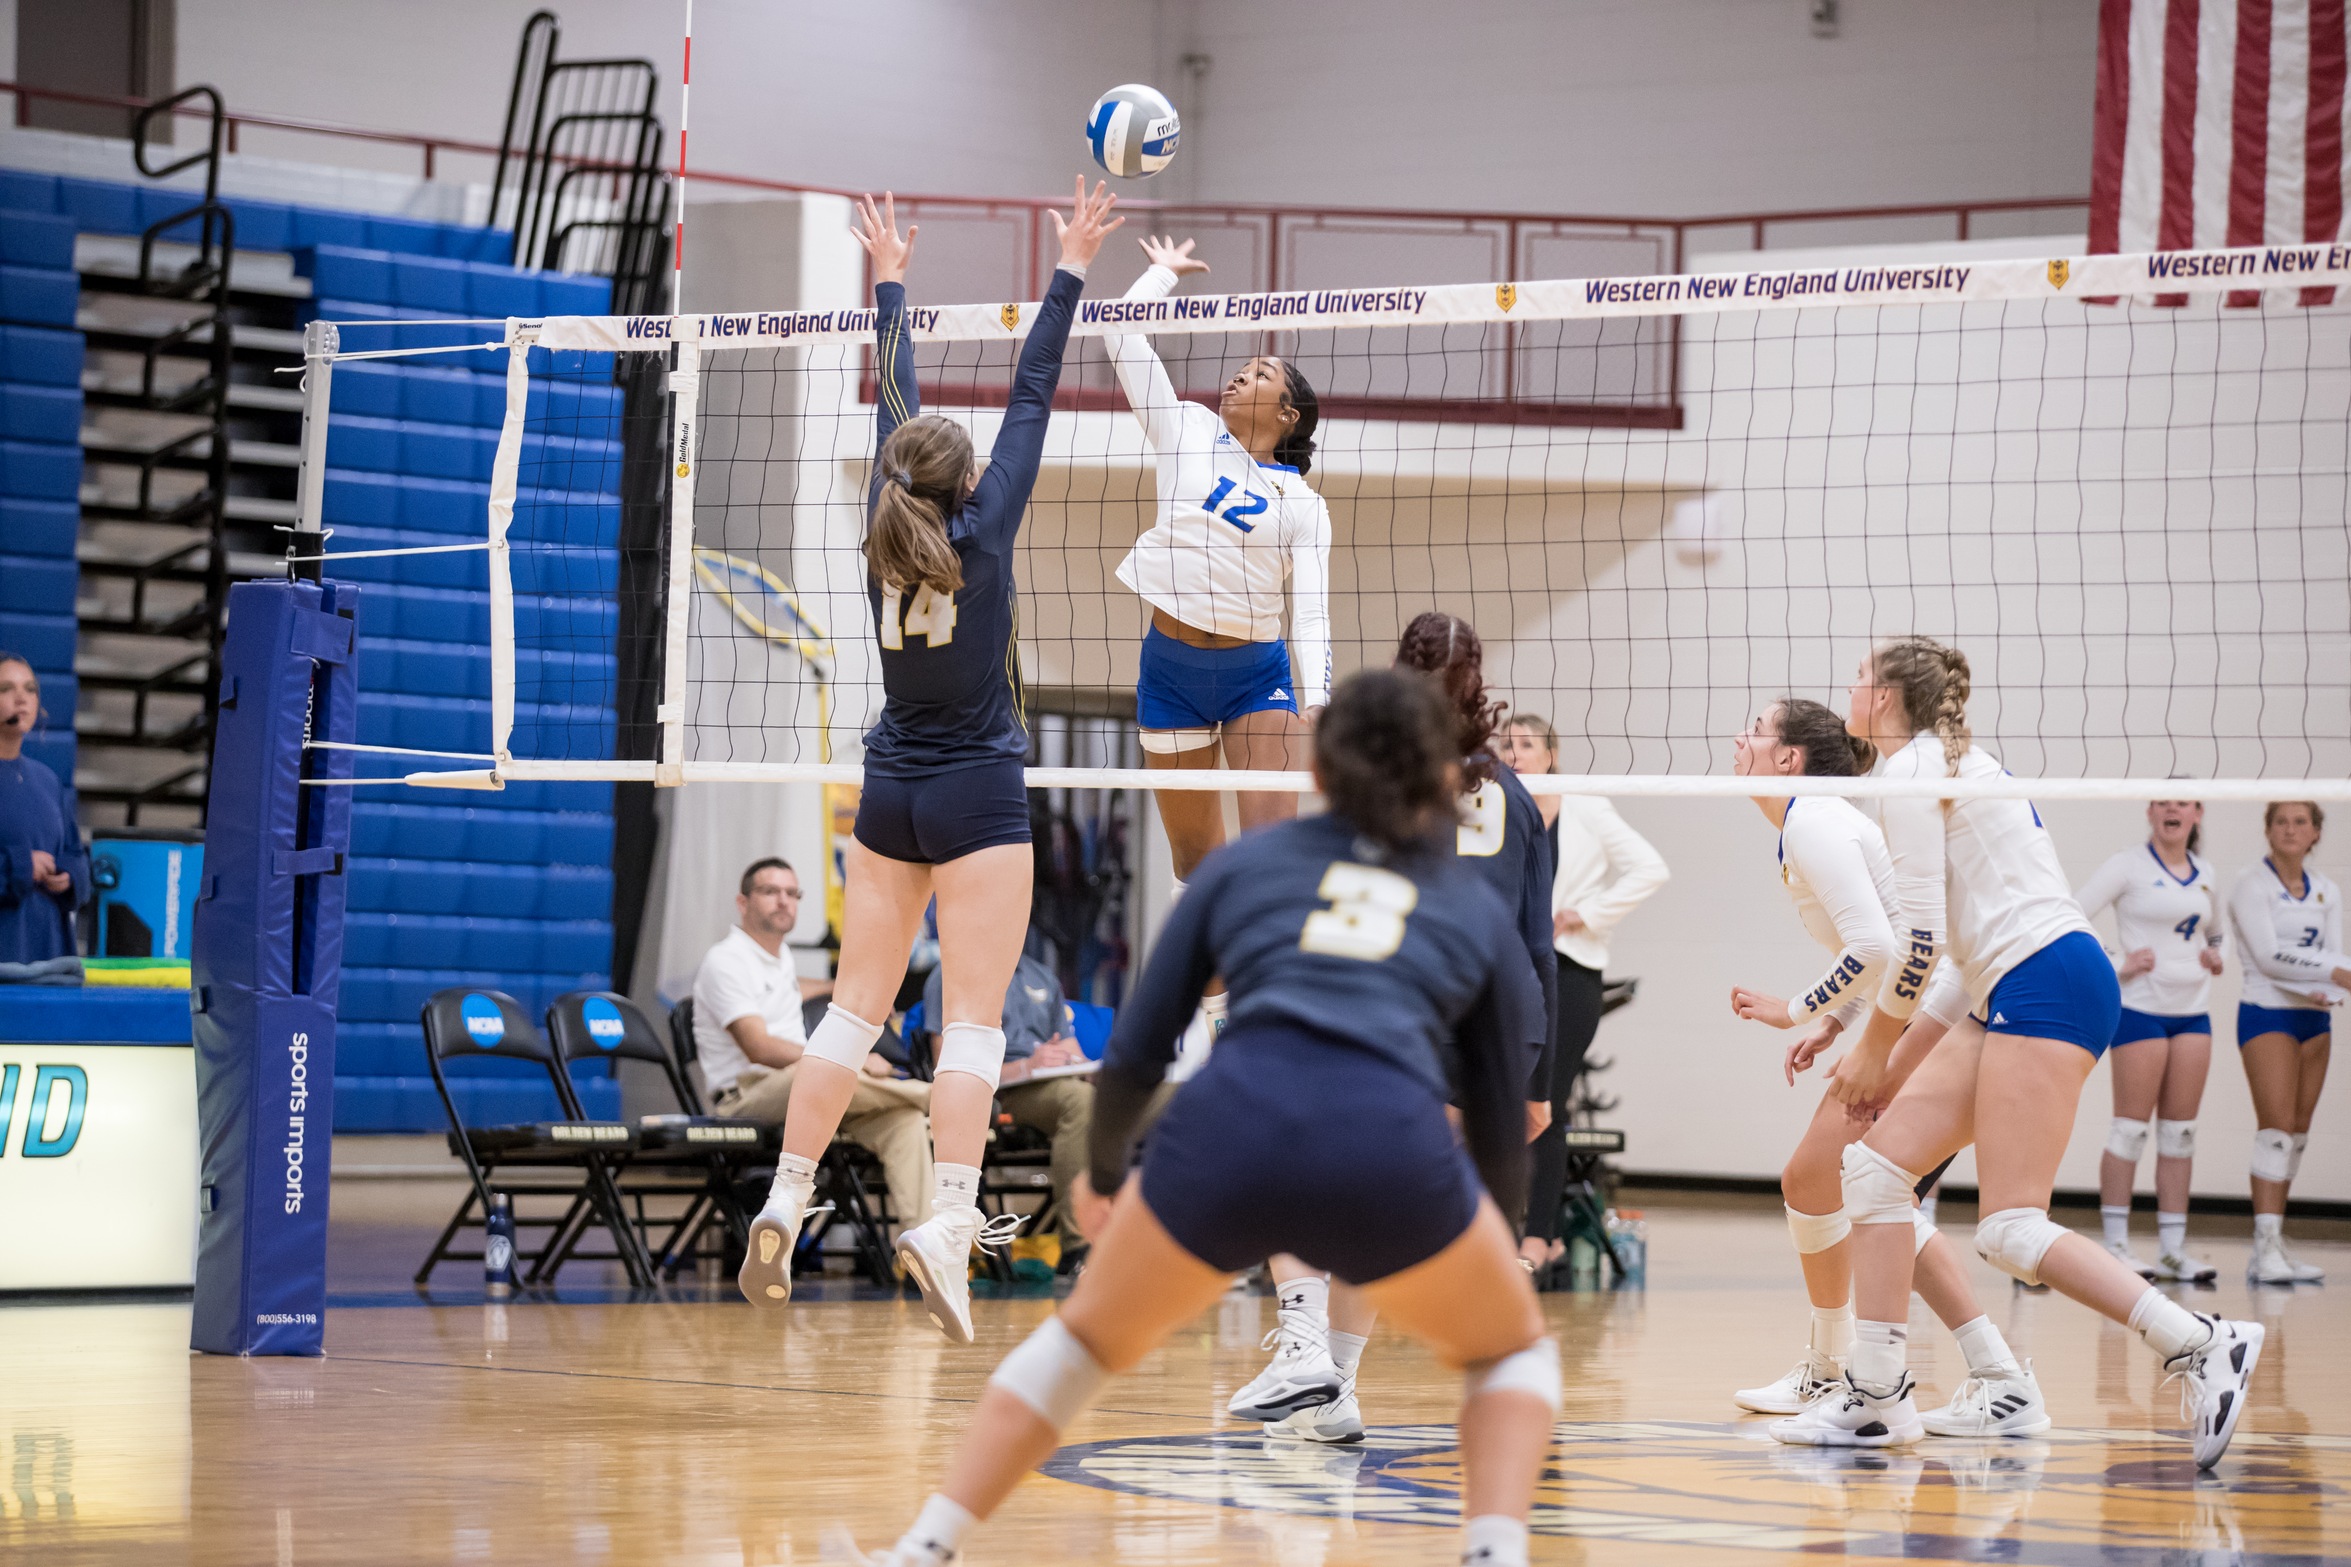 Molina, Hawes, Long, & Scott Record Double Digit Kills in CCC Quarterfinal Upset Win over Wentworth